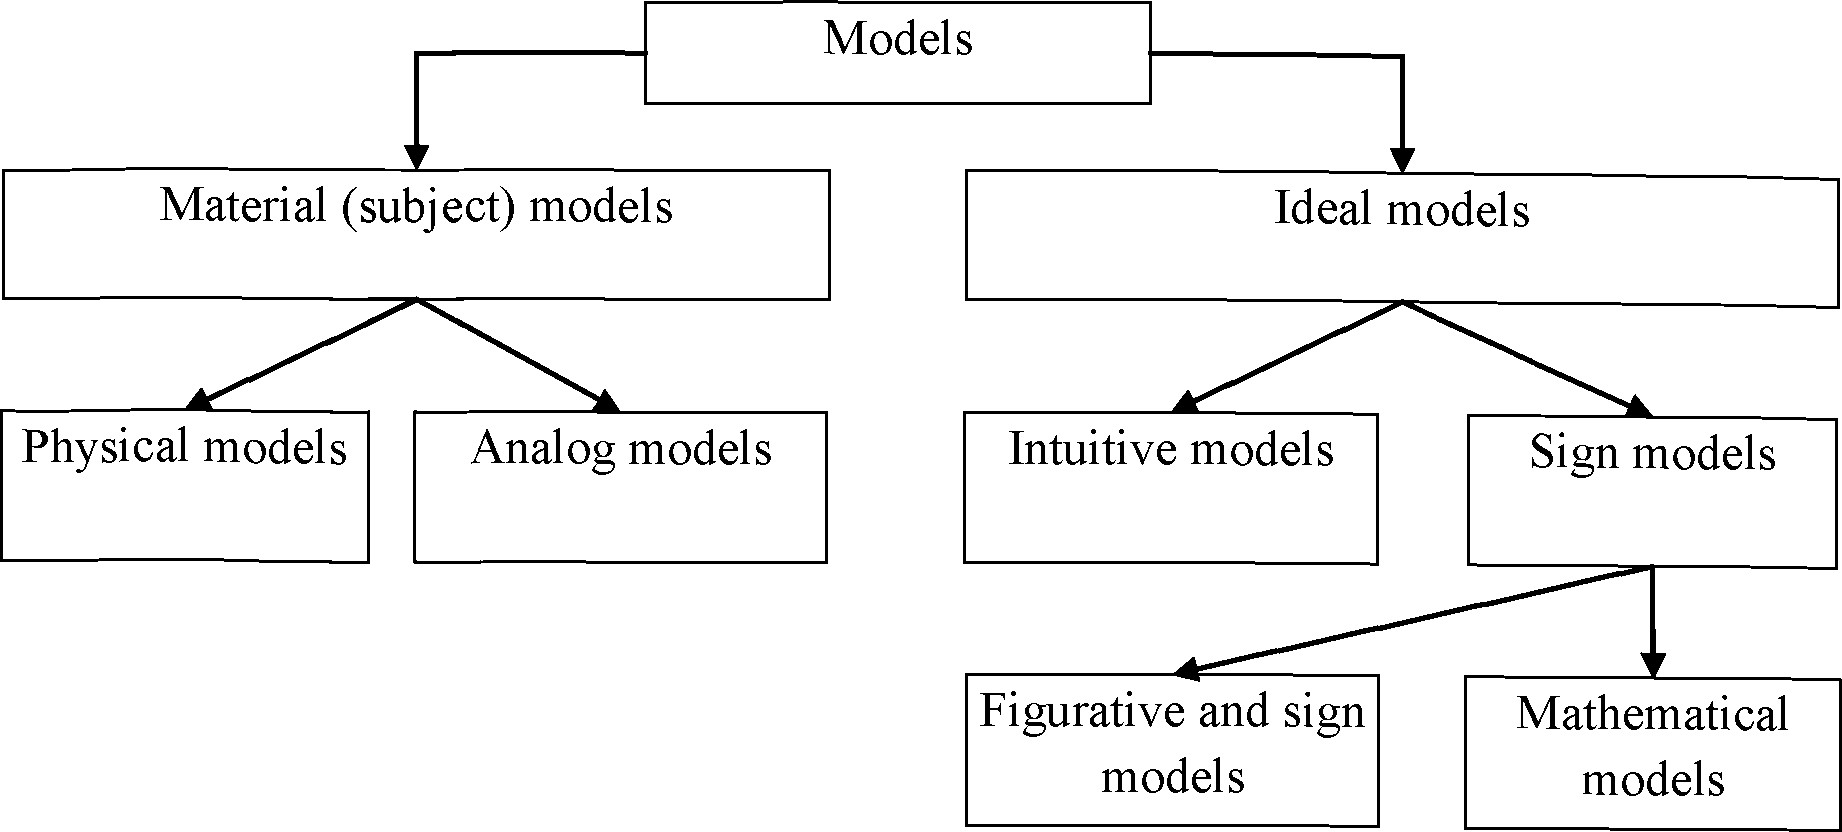 The role and place of mathematical models in teaching students to solve optimization problems